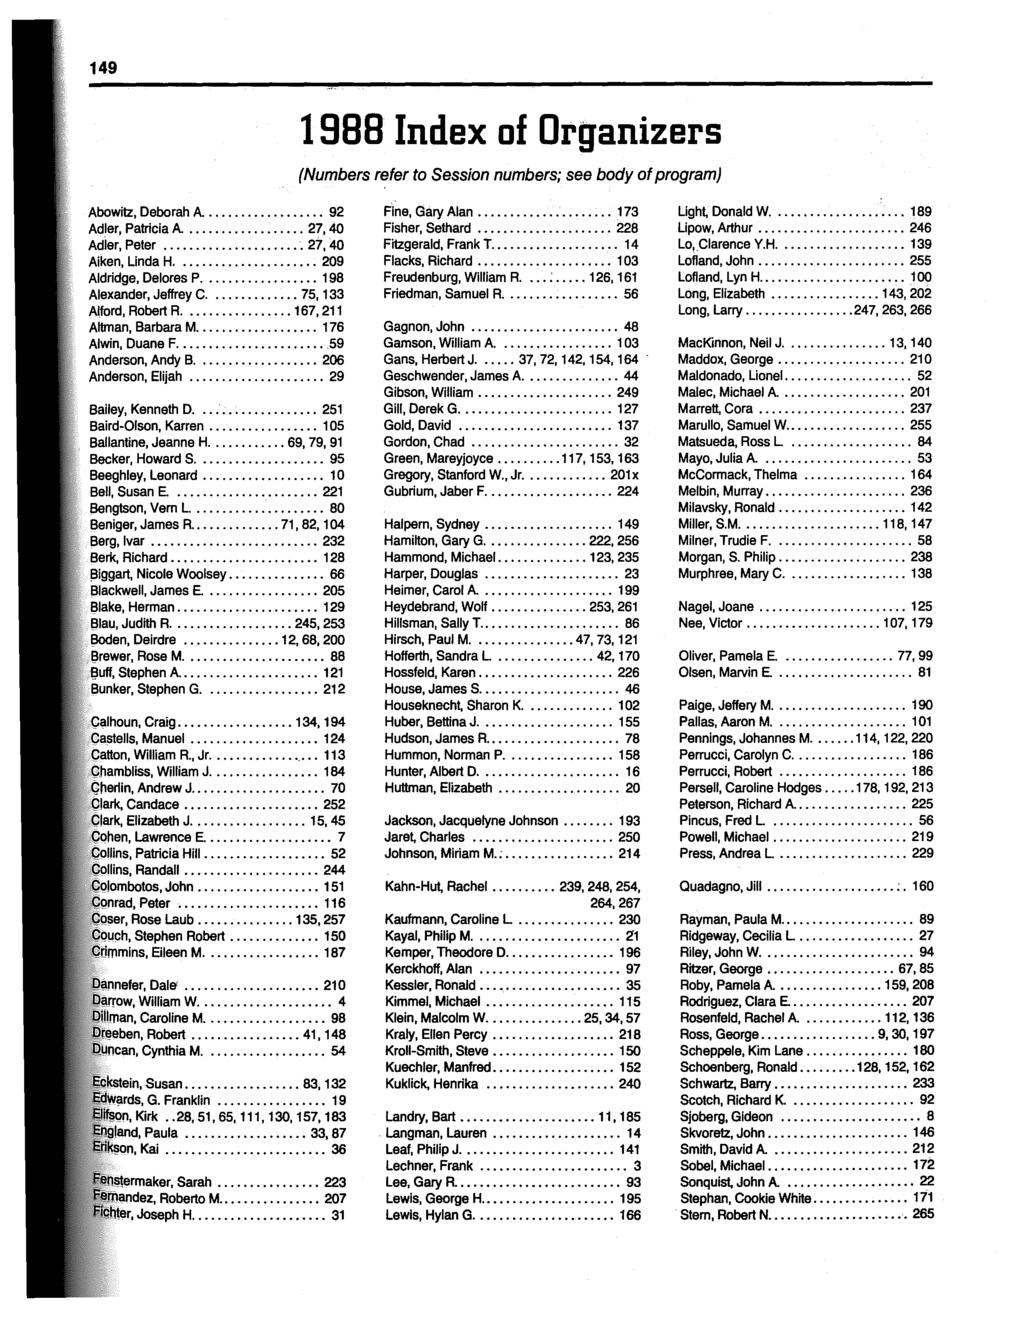 149 1988 Index of Organizers (Numbers refer to Session numbers; see body of program) Abowitz, Deborah A....... 92 Adler, Patricia A...... 27, 40 Adier, Peter... 27,40 Aiken, Unda H.